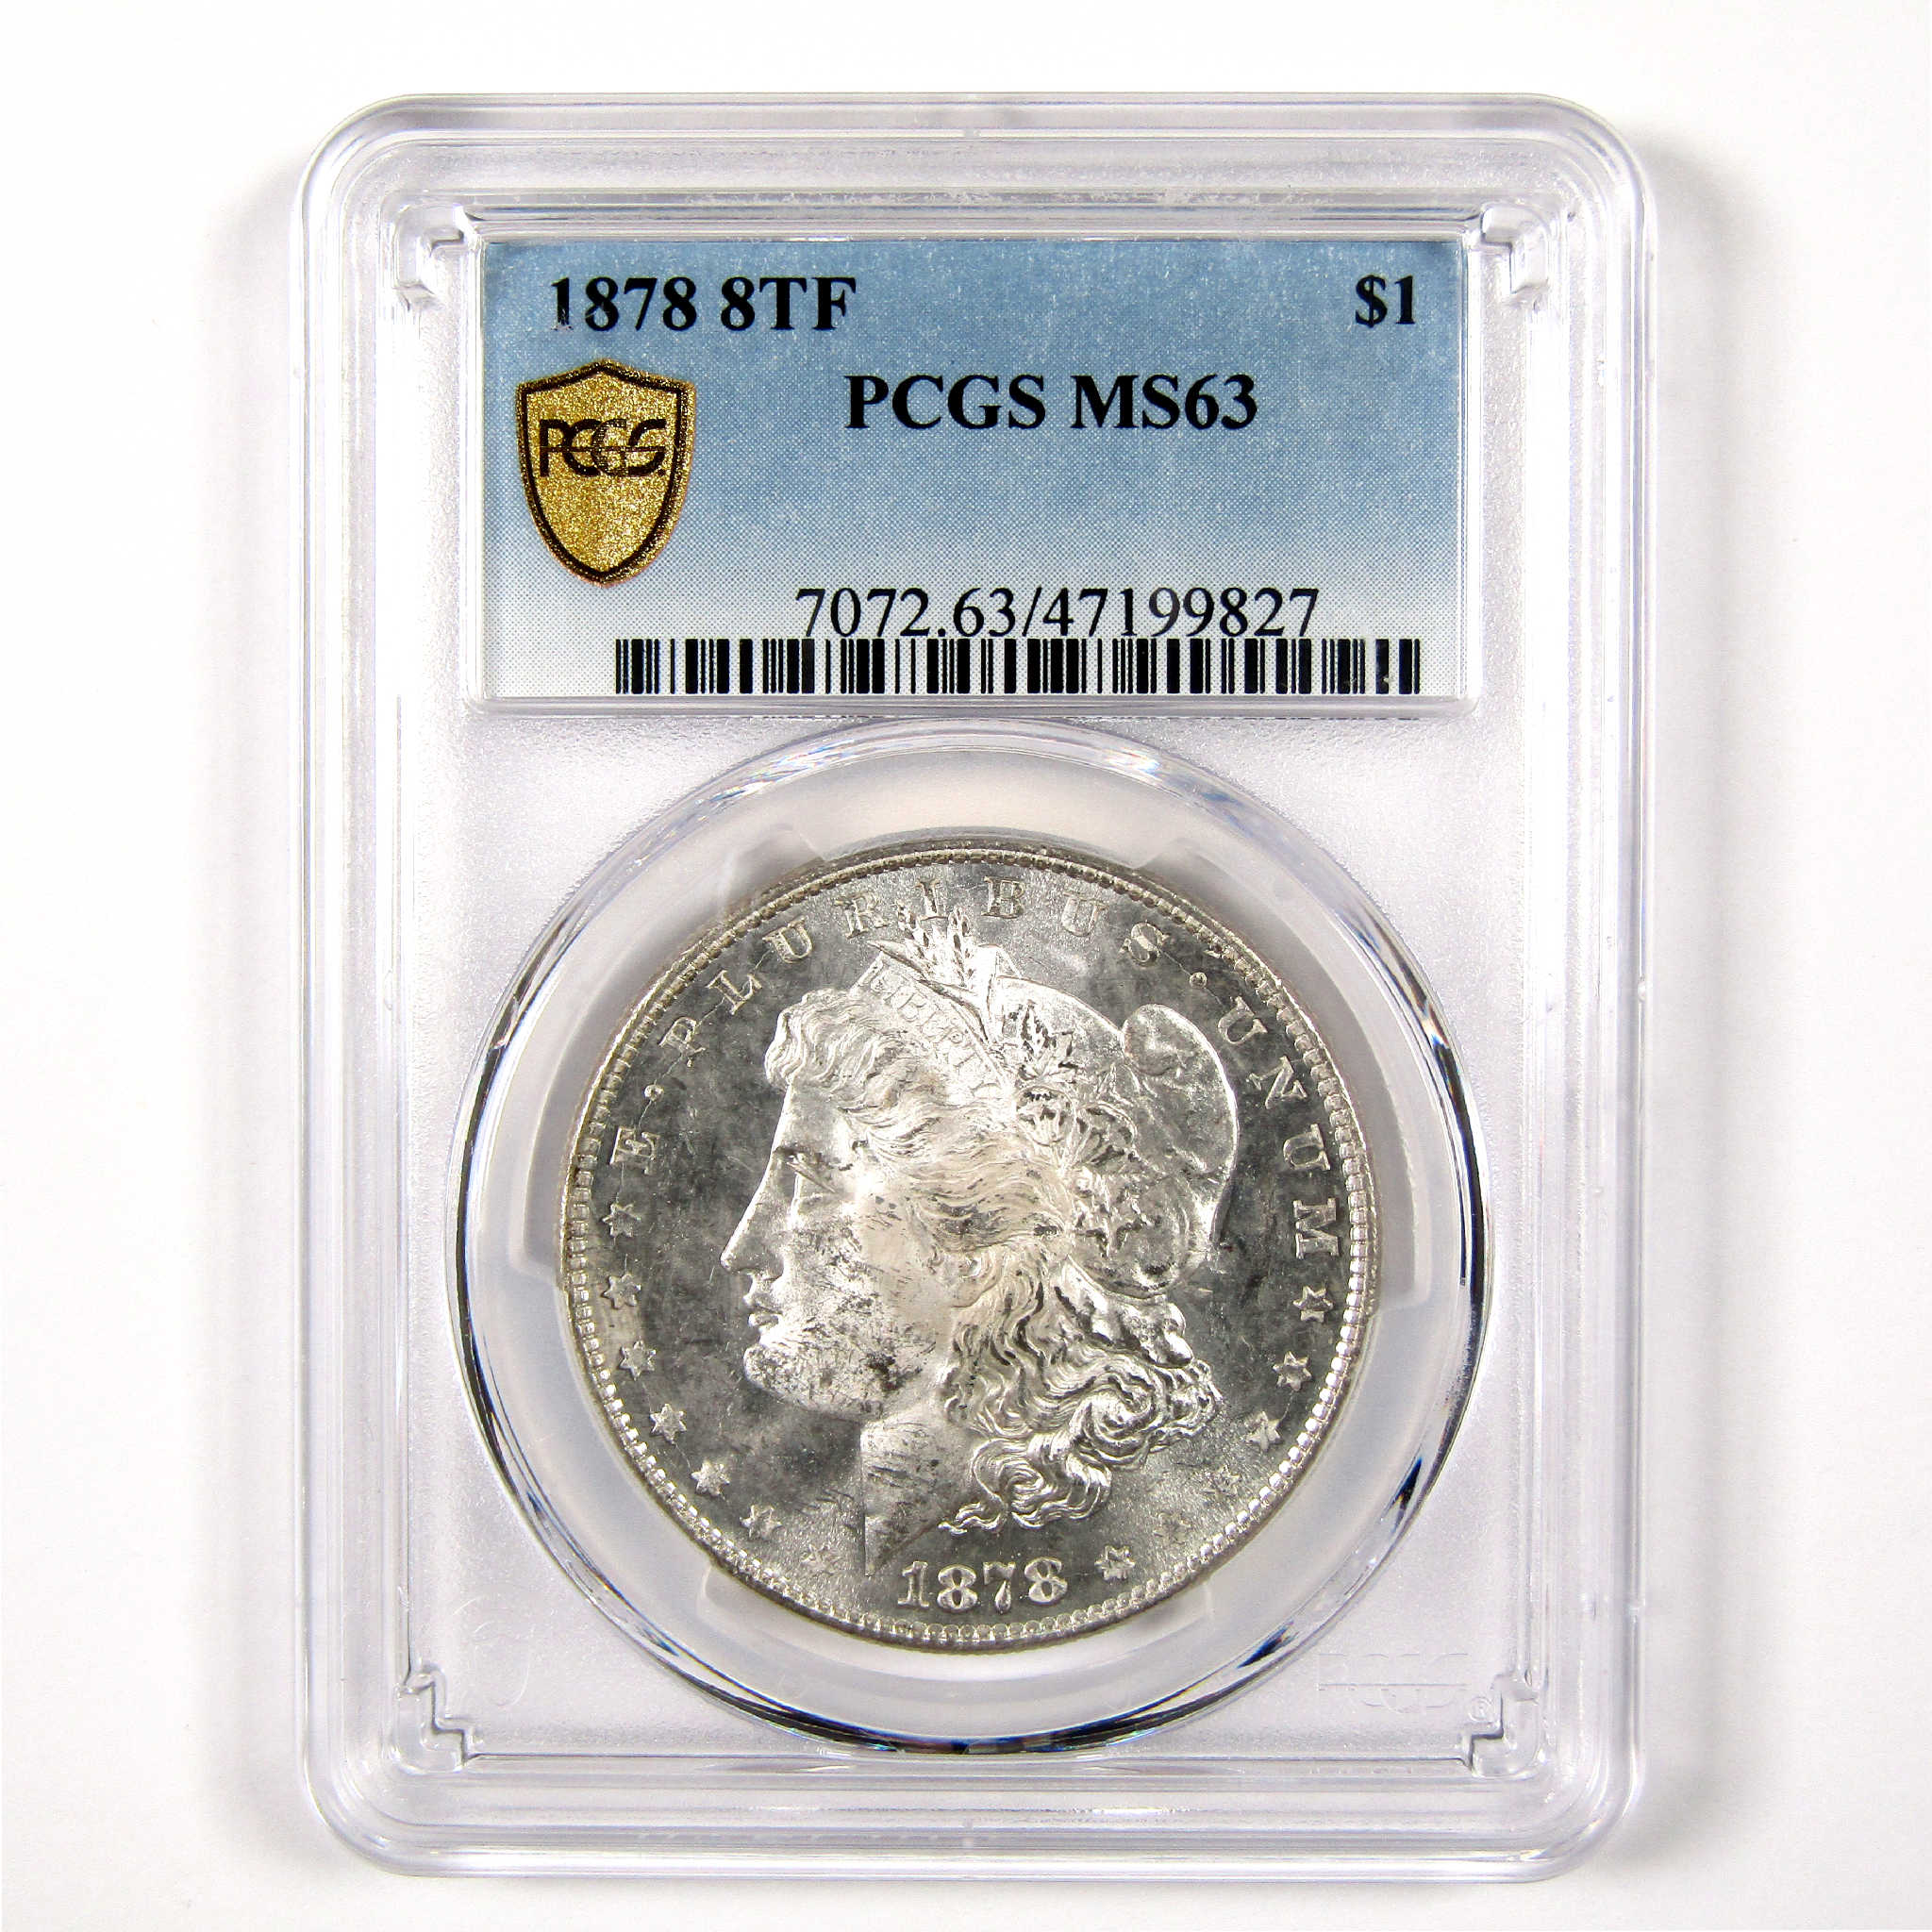 1878 8TF Morgan Dollar MS 63 PCGS Silver $1 Uncirculated SKU:I11317 - Morgan coin - Morgan silver dollar - Morgan silver dollar for sale - Profile Coins &amp; Collectibles